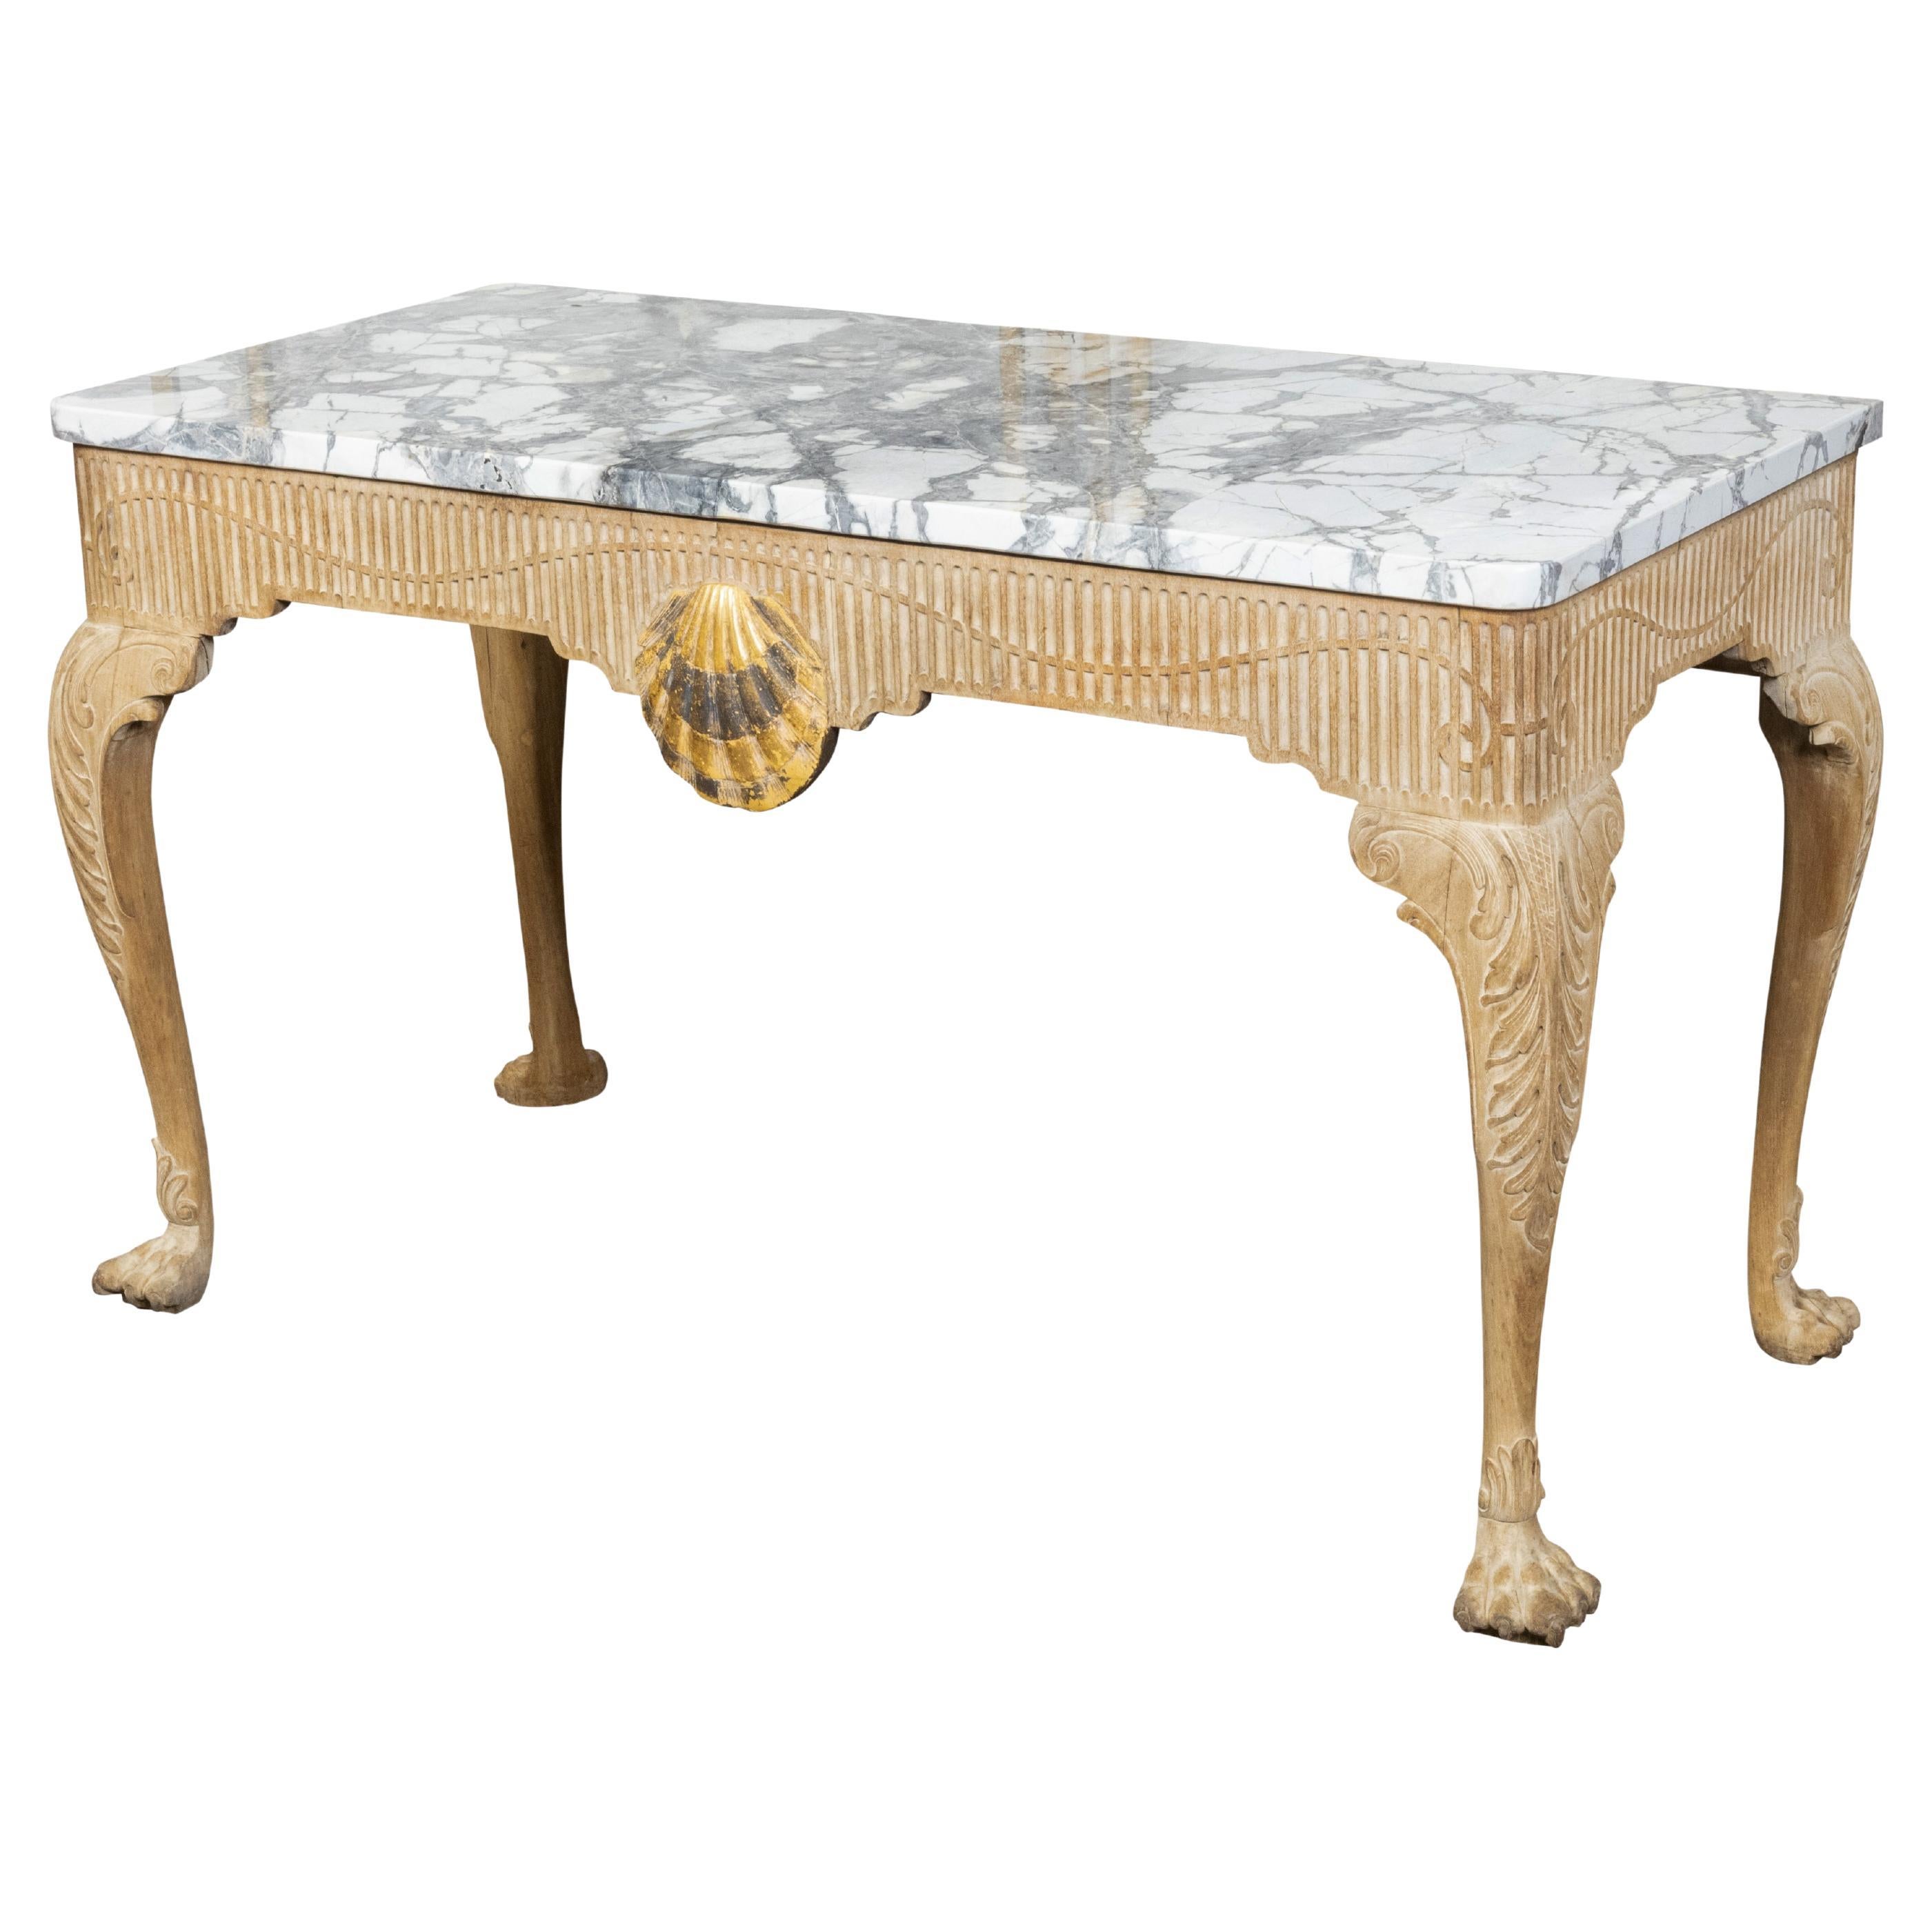 English Late 18th Century Console Table with Marble Top and Carved Apron For Sale